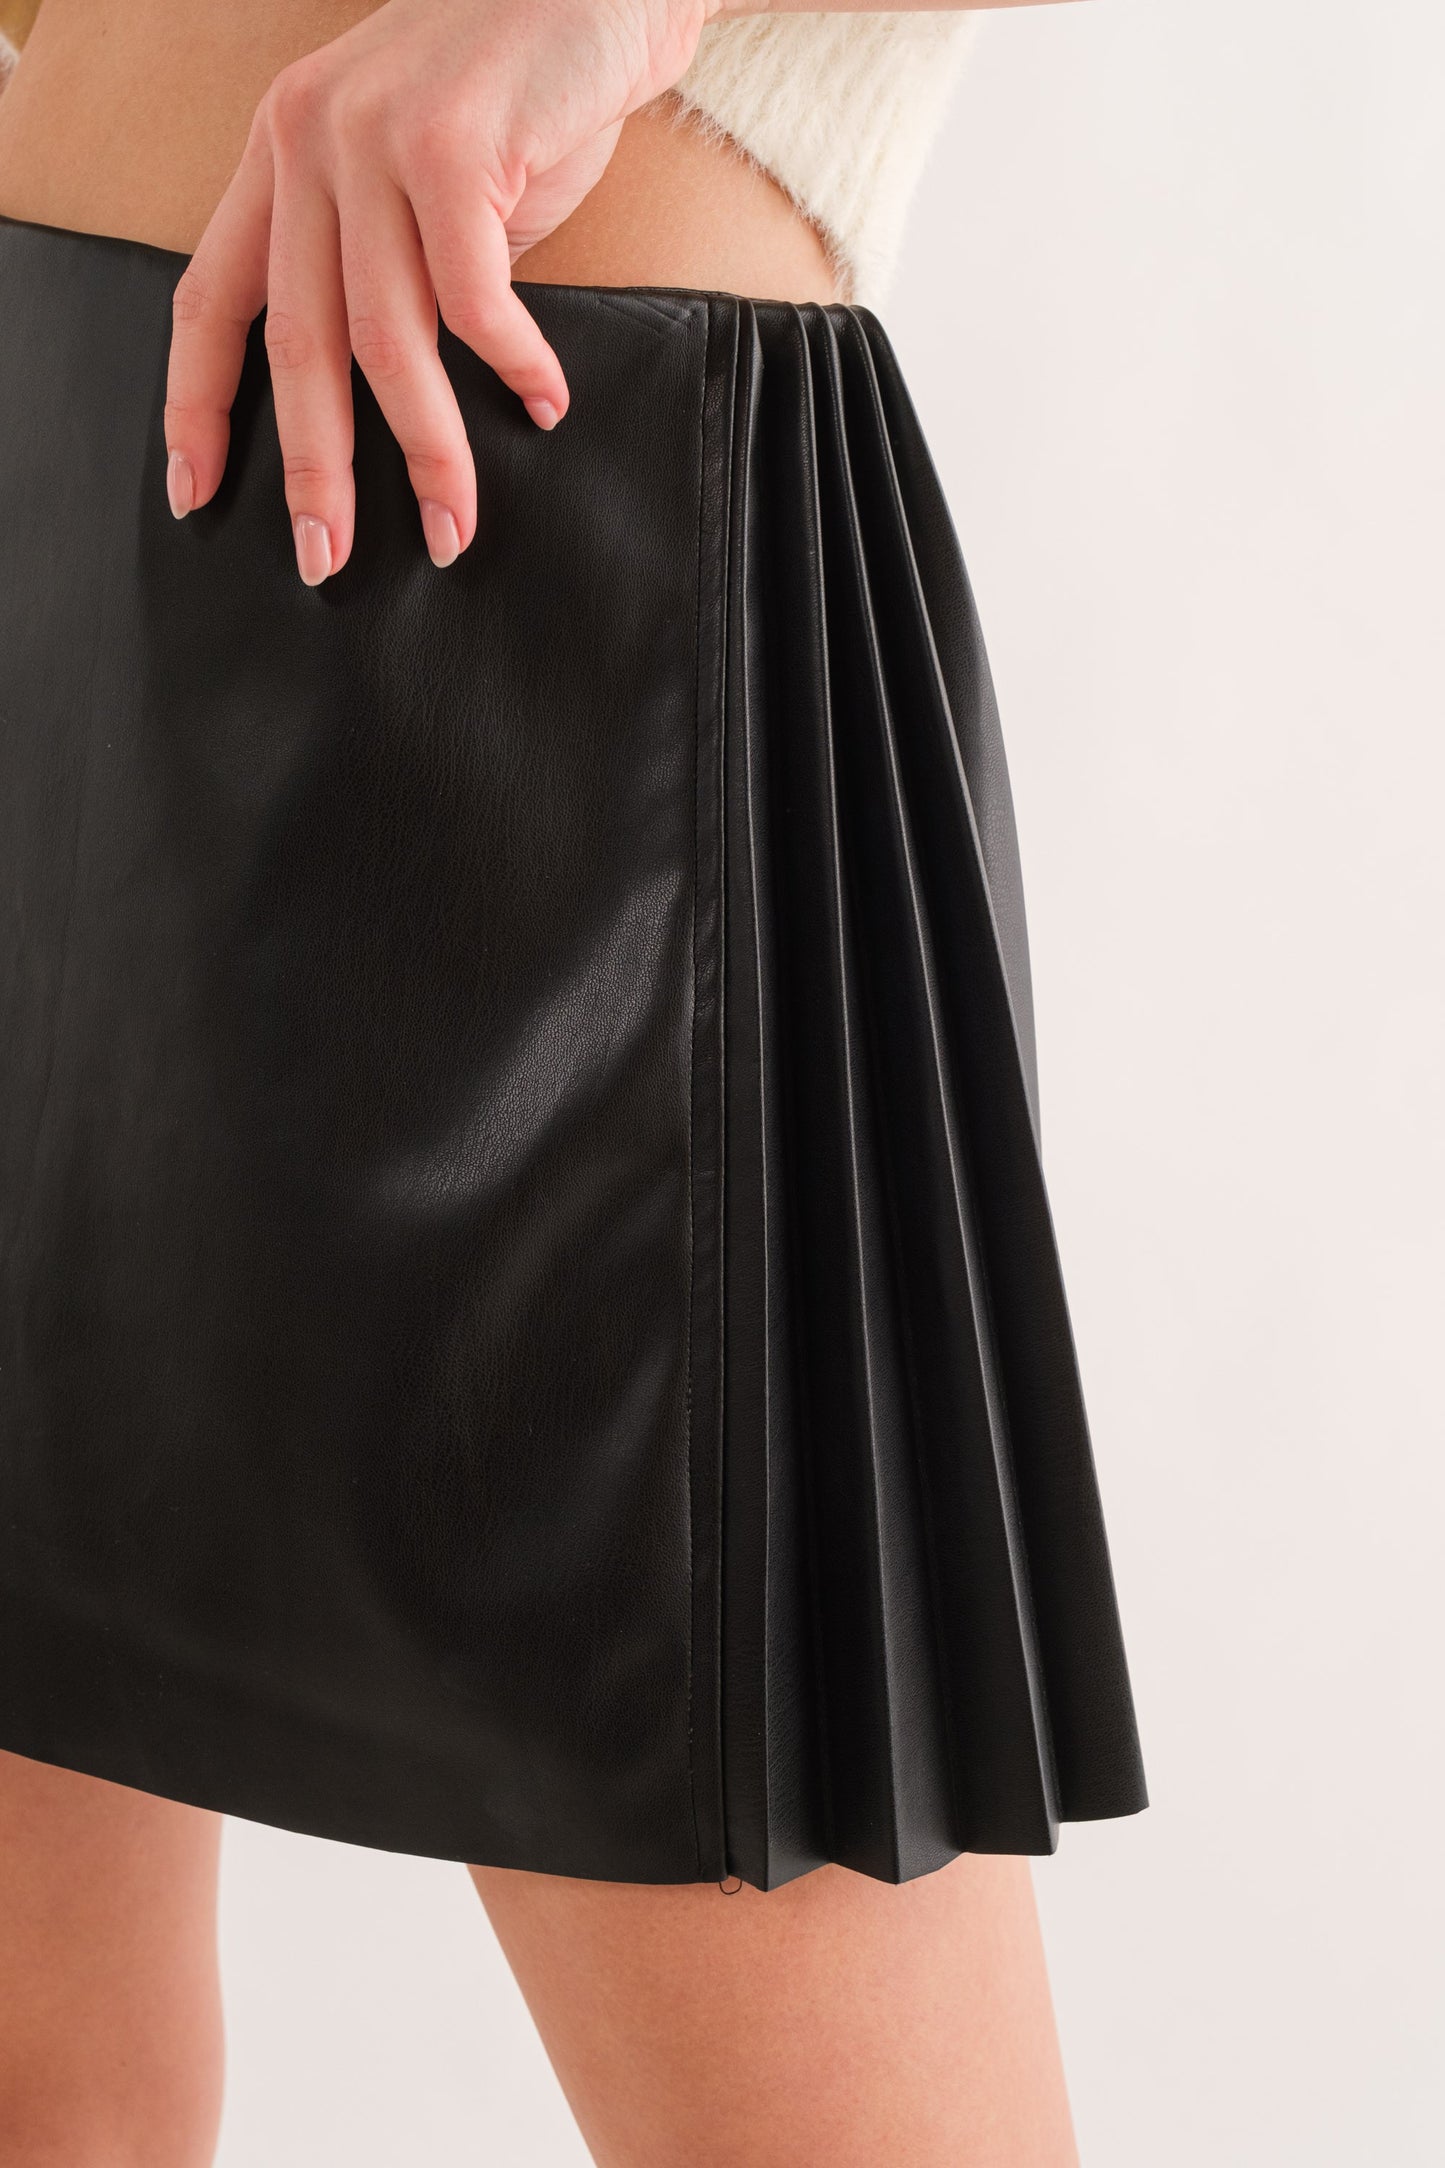 Sporty Spice Faux Leather Skort